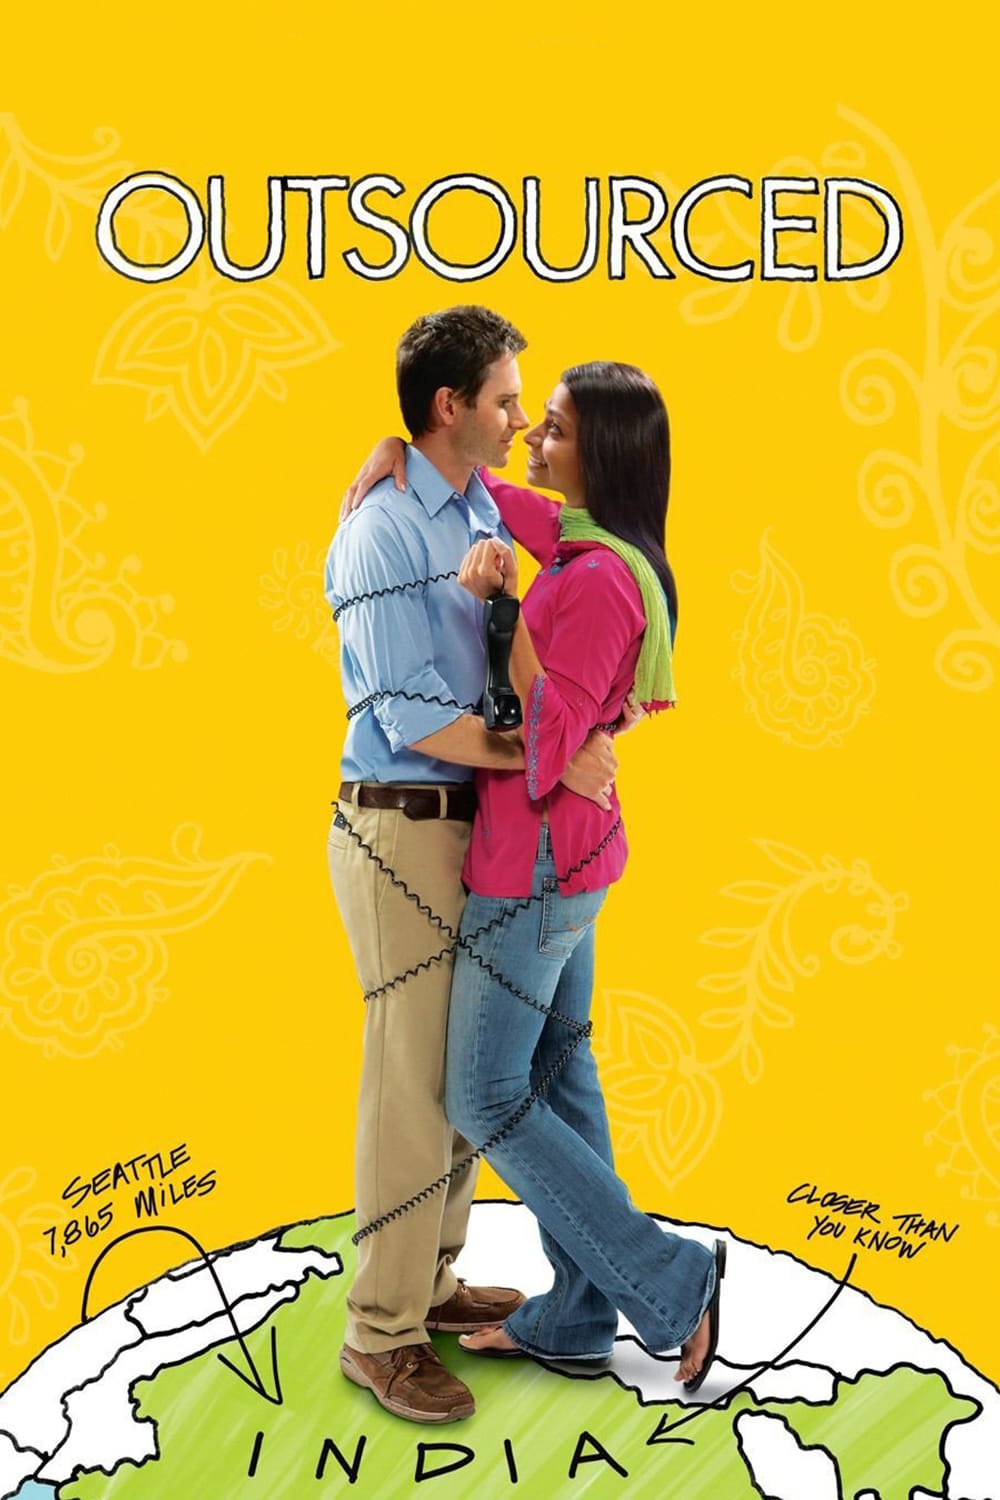 Poster for the movie "Outsourced"